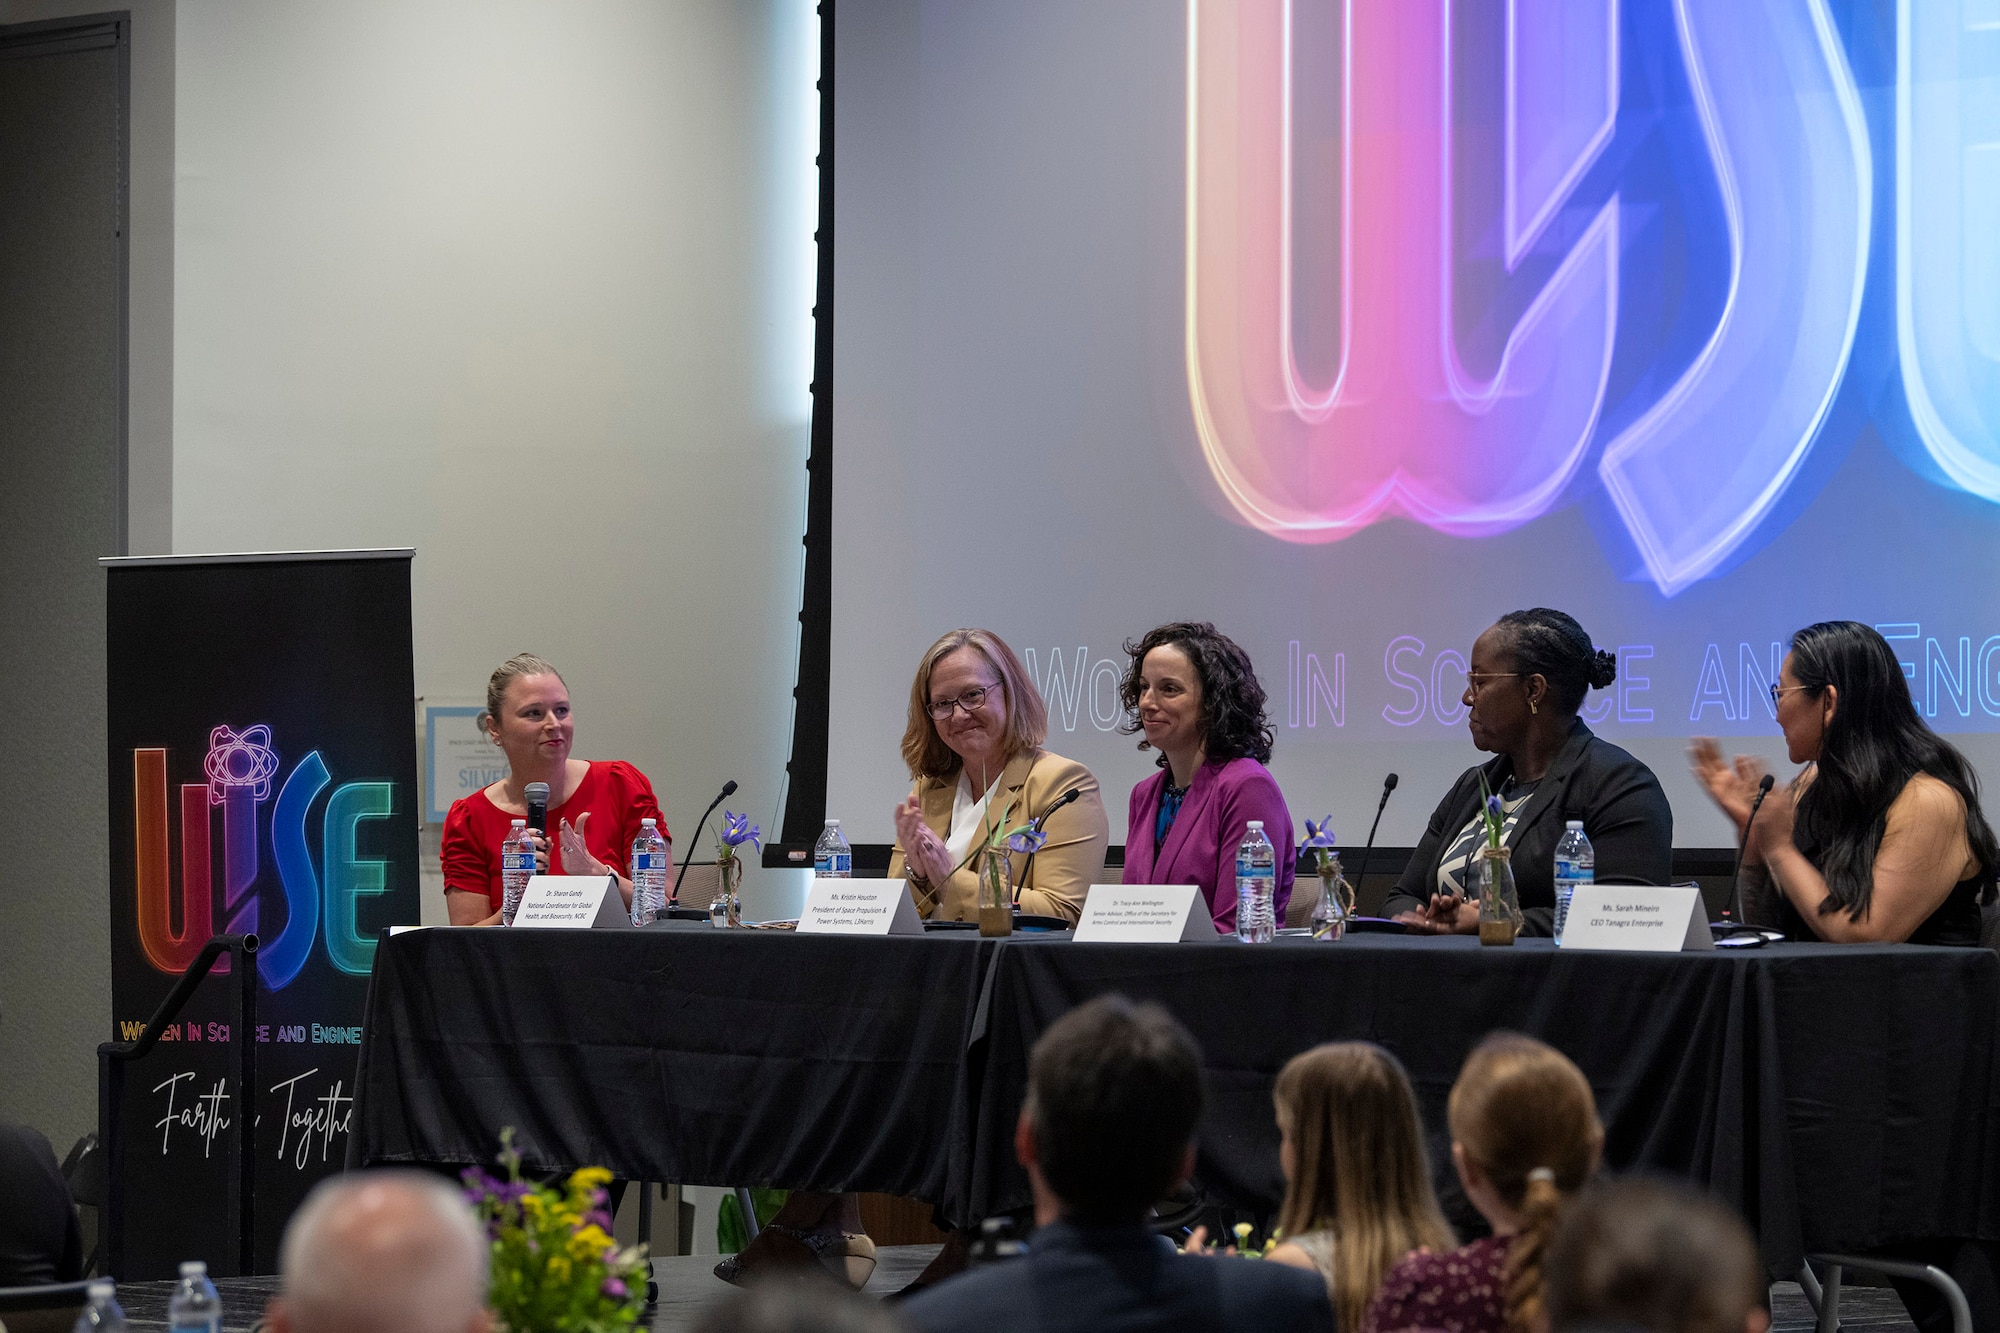 Ms. Aarolyn Hayes (far left), a member of the Air Force Technical Applications Center at Patrick Space Force Base, Fla., moderates an expert panel entitled “Science and Engineering for the Future of Defense” during the 2024 Women in Science and Engineering Symposium March 12 in Rockledge, Fla.  Panel members included (from left to right) Dr. Sharon Gandy, Joint National Coordinator for Global Health and Biosecurity; Kristin Houston, President of Space Propulsion and Power Systems at L3Harris; Dr. Tracey-Ann Wellington, Senior Advisor to the Undersecretary of Arms Control and International Security; and Sarah Mineiro, Chief Executive Officer of Tanagra Enterprises.  AFTAC has hosted the WiSE Symposium since 2014 to highlight and bring attention to the value that gender diversity brings to the science, technology, engineering, and mathematics workforce.  (U.S. Air Force photo by Matthew S. Jurgens)